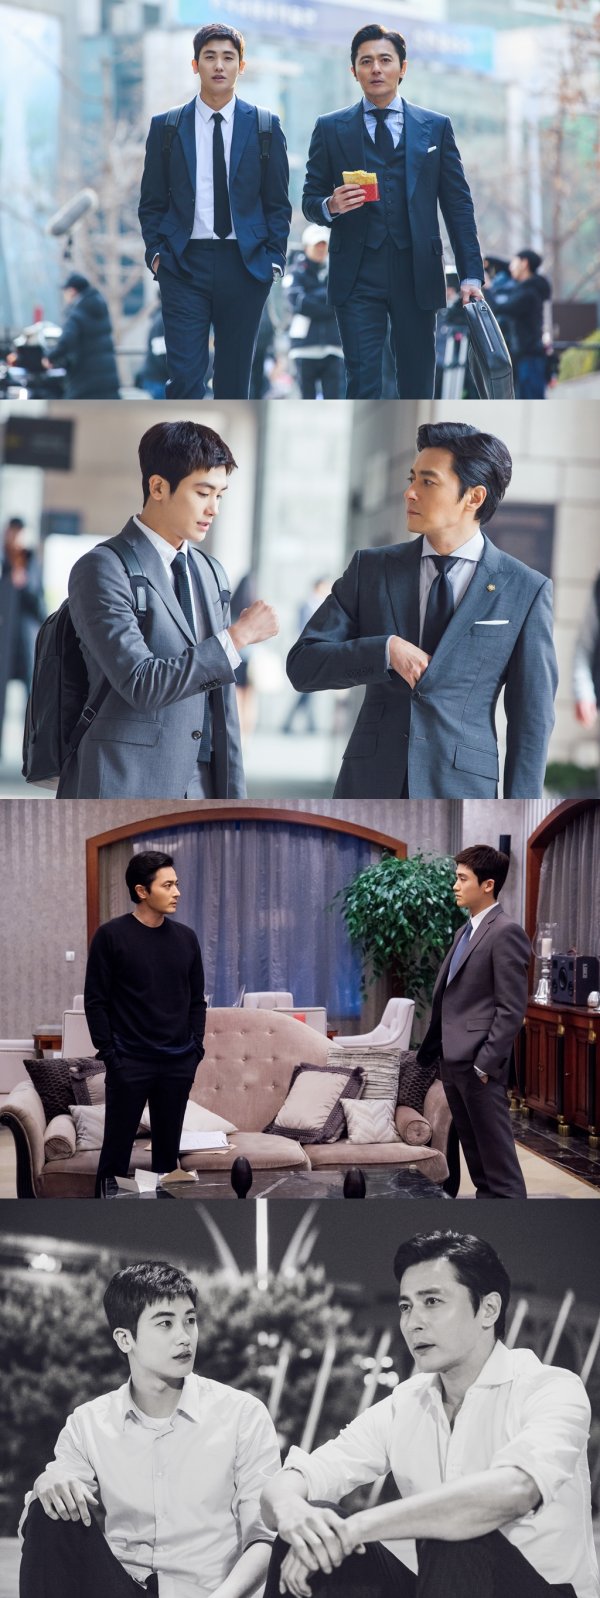 Suits Jang Dong-gun and Park Hyung-sik are definitely changing each other.We have seen numerous bromance dramas, these dramas depict the hot friendship of men through two warm men, but because they have seen too much.Friendship of men who are just cool is no longer interesting.In this sense, KBS 2TV Wednesday-Thursday Evening drama Suits (playplayplay by Kim Jung-min/director Kim Jin-woo/Produced Monster Union, Entermedia Pictures) which made a new attempt with the bromance drama is worth eye-catching.In Suits, two men, Miniforce Seok (Jang Dong-gun), and Park Hyung-sik, appear, who are completely different, but attractive enough to rob their eyes.The relationship between two men in the play changes organically depending on the situation and the event that you face: it is simply a special romance that can not be Han Zheng with the word friendship.At this point, lets look at the changes in the relationship between two men who make Suits special.Lets look at how they have influenced each other and what changes they are experiencing.You will be able to enjoy the return point Suits more chewy and thrilling.One-way relationships  complementary relationshipsThe relationship between the two men was unilateral: the Miniforce seat, which had everything, gave Ko Yeon-woo a chance, who had the ability but did not get a chance.Miniforce was a mentor who gave opportunities and advice, and Ko Yeon-woo was a mentee that grew on the basis of this, but they changed into complementary relationships as they continued to do so.The two of them are able to fill each other and lead each other in a better direction.Jang Dong-gun, who seemed to have all, wears truth and emotionMiniforce is the legendary lawyer at South Koreas top law firm. Complete man with all things.If he found what he needed, he would have been human, because he did not need humanity for him to use his emotions coldly for the sake of winning.The Miniforce stones have changed because of the high-levelness of the enemy, and when I face the enemy I have never seen before, I have accepted the advice of Ko Yeon-woo.In the eighth ending, Ko Yeon-woo brought up the story of the case during the inspection of the Miniforce seat.Attention is focusing on how Miniforce Seok, who learned that there was a victim who was framed for the destruction of evidence by Oh (played by Jeon No-min) at the time, will act and how he will change due to Ko Yeon-woo.Park Hyung-sik, a genius who lived a bottom life, takes the opportunity to become a lawyerHe had a genius memory and empathy. But the world did not give him a chance, and he lived a hard day.For such a long time, Miniforce gave him the opportunity to work as a new lawyer at the South Korea Supreme Law Firm.I came a step closer to the dream of being a lawyer who seemed to be unable to reach it.Ko Yeon-woo, who became a new lawyer, is growing up to be a more authentic lawyer than he really is, in the face of events, because there was a Miniforce seat that gave exquisite opportunities and excellent advice.In addition, I can advise Miniforce on the contrary.It is expected that Ko Yeon-woo, who has even got the opportunity of a fake but formal lawyer, will show some growth in the future and what kind of performance he will show as a lawyer.The non-general relationship of characters in the drama makes the drama more colorful and special.Two men in Suits, which shows a romance that can not be Han Zheng with the fragmentary words cool and friendship, are Miniforce Seok,The two male relationships that change each other are interesting and the viewers are expected to see Suits.Meanwhile, KBS 2TV Wednesday-Thursday Evening drama Suits is broadcast every Wednesday and Thursday at 10 p.m.